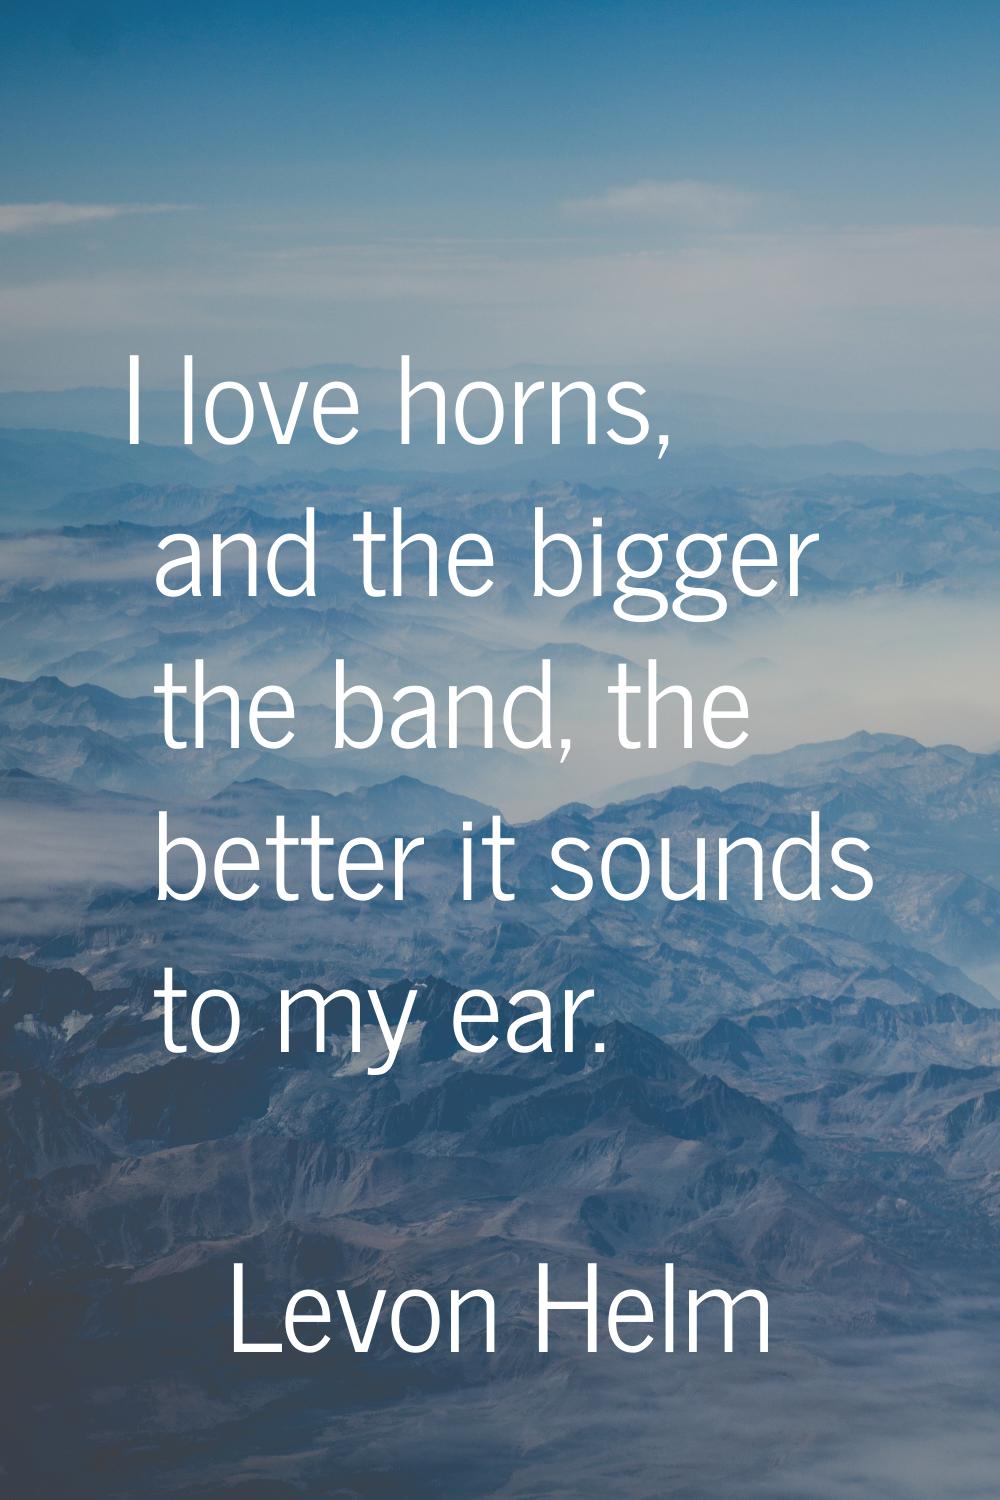 I love horns, and the bigger the band, the better it sounds to my ear.